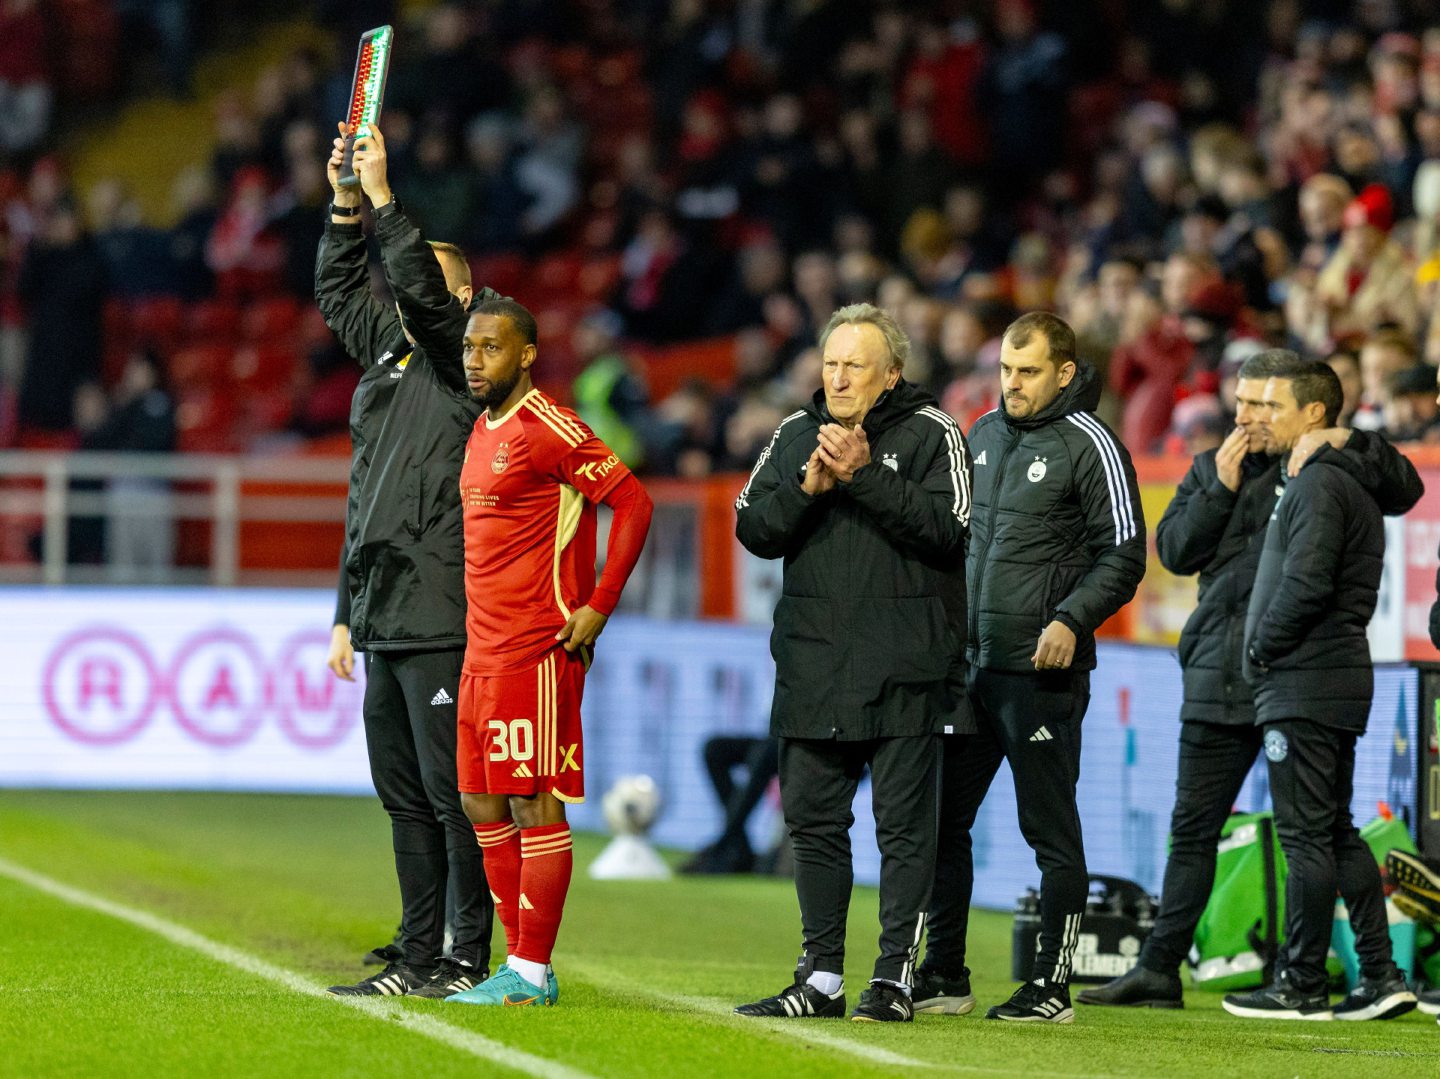 Junior Hoilett of Aberdeen comes on to make his debut against Hibs. Image: Shutterstock